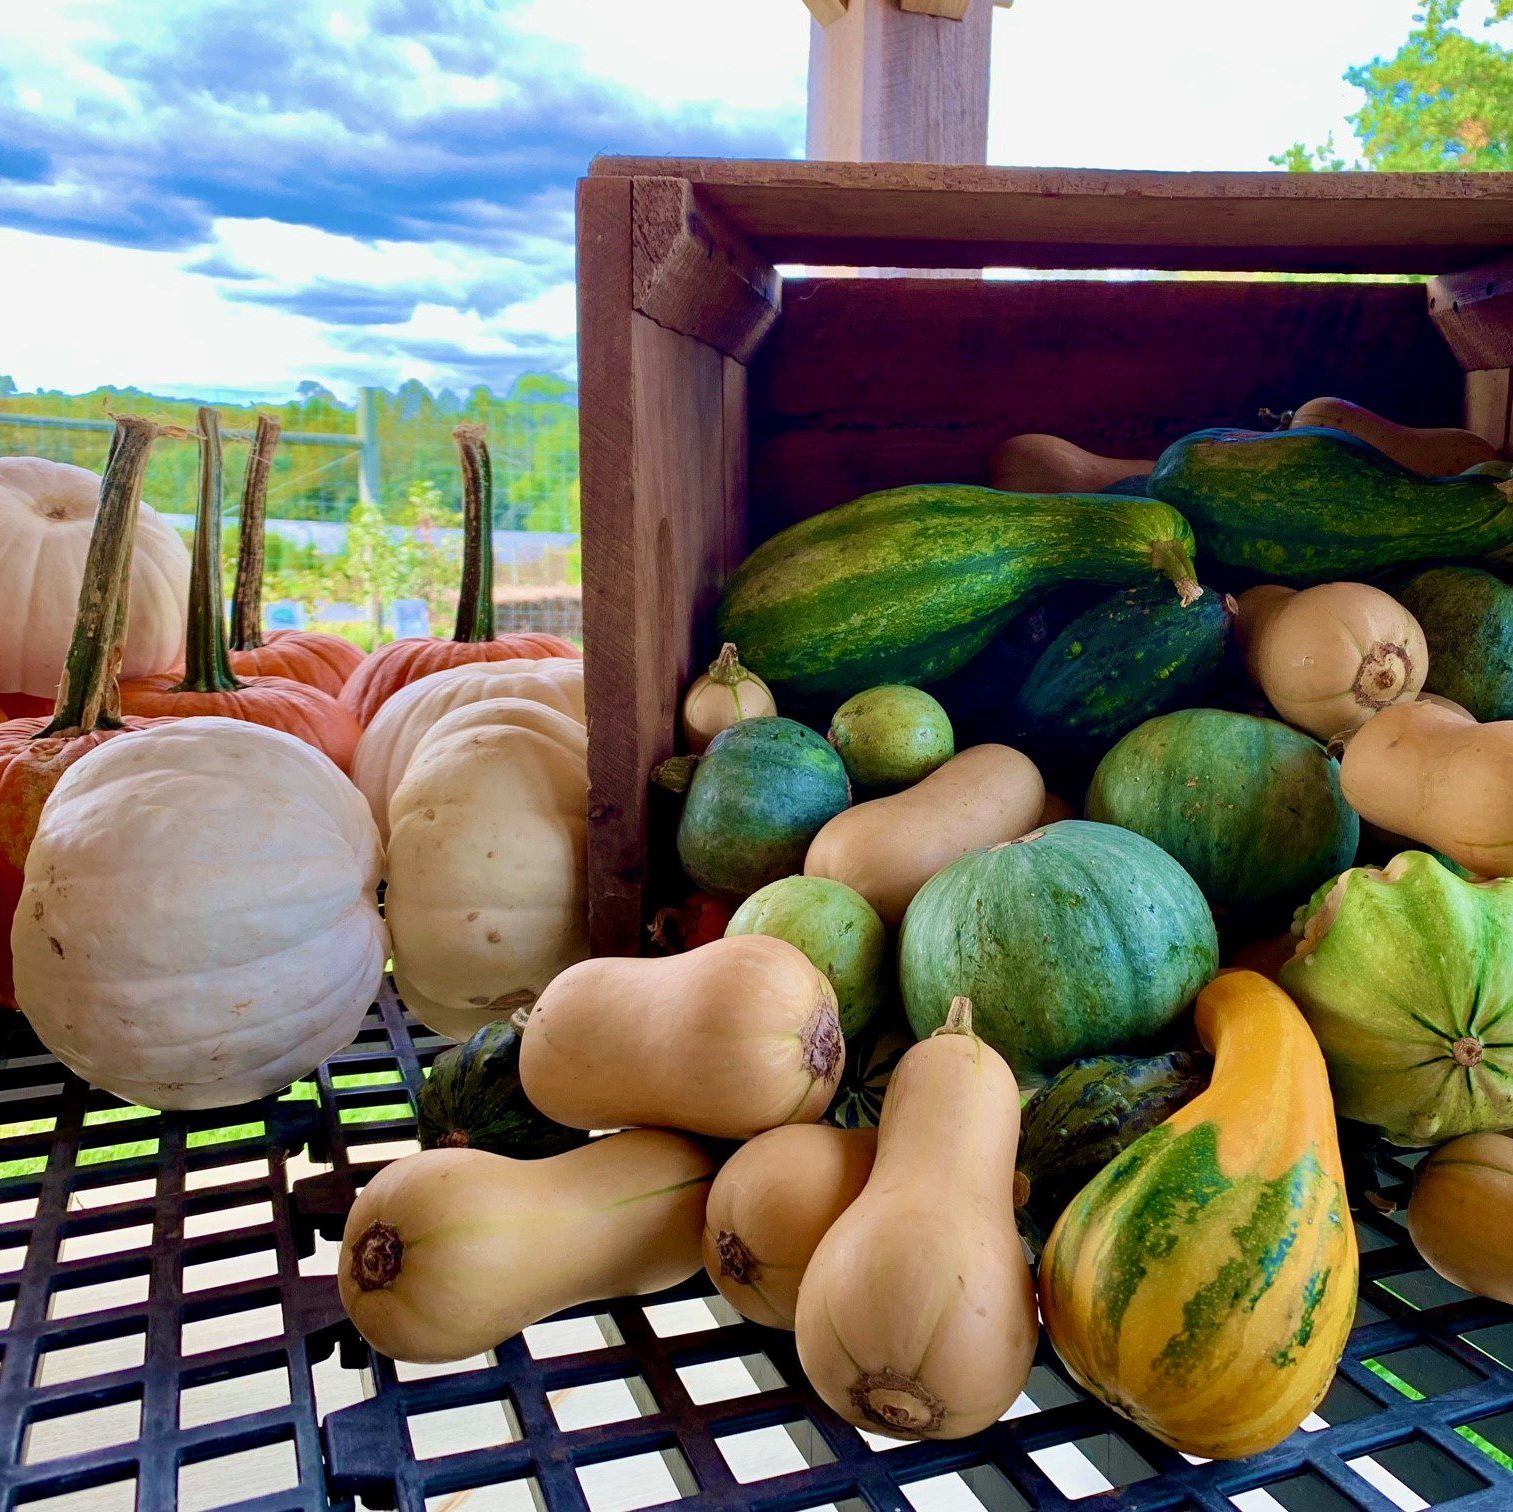 Market at Coverdale fall autumn decorative gourds and field -Photography  by Alyssa Molin